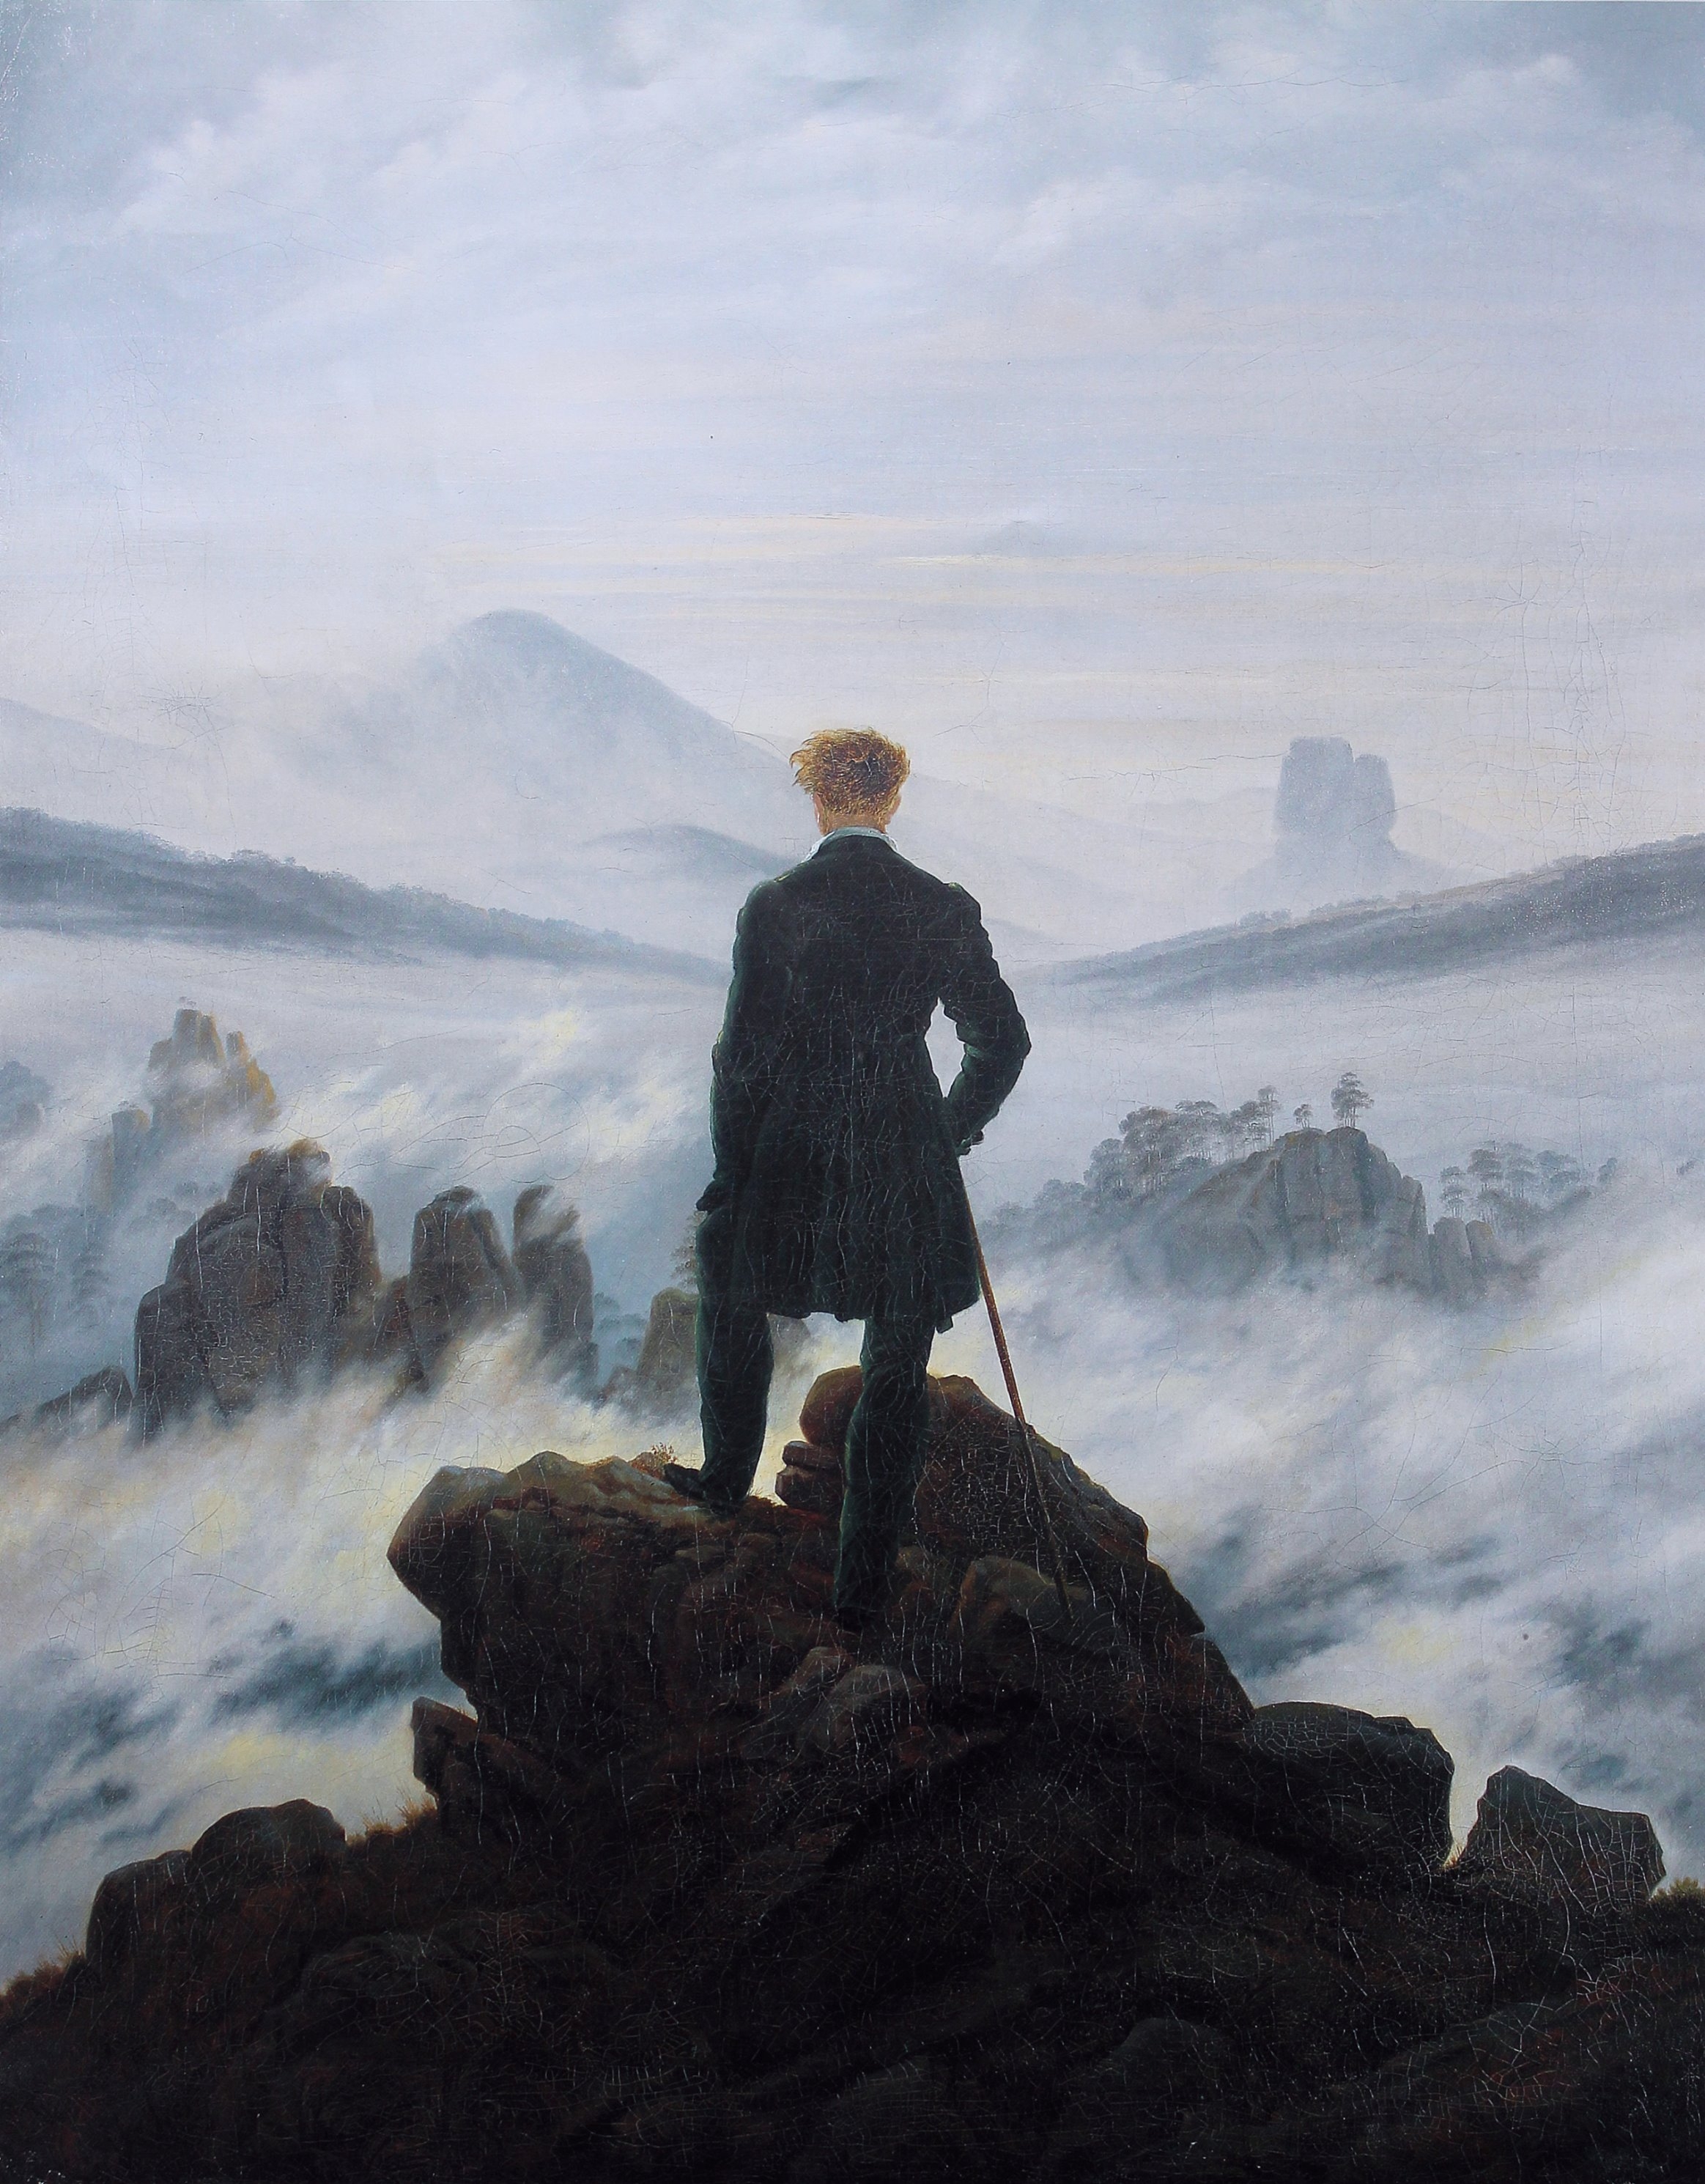 a man stands on top of a mountain overlooking a sea of clouds